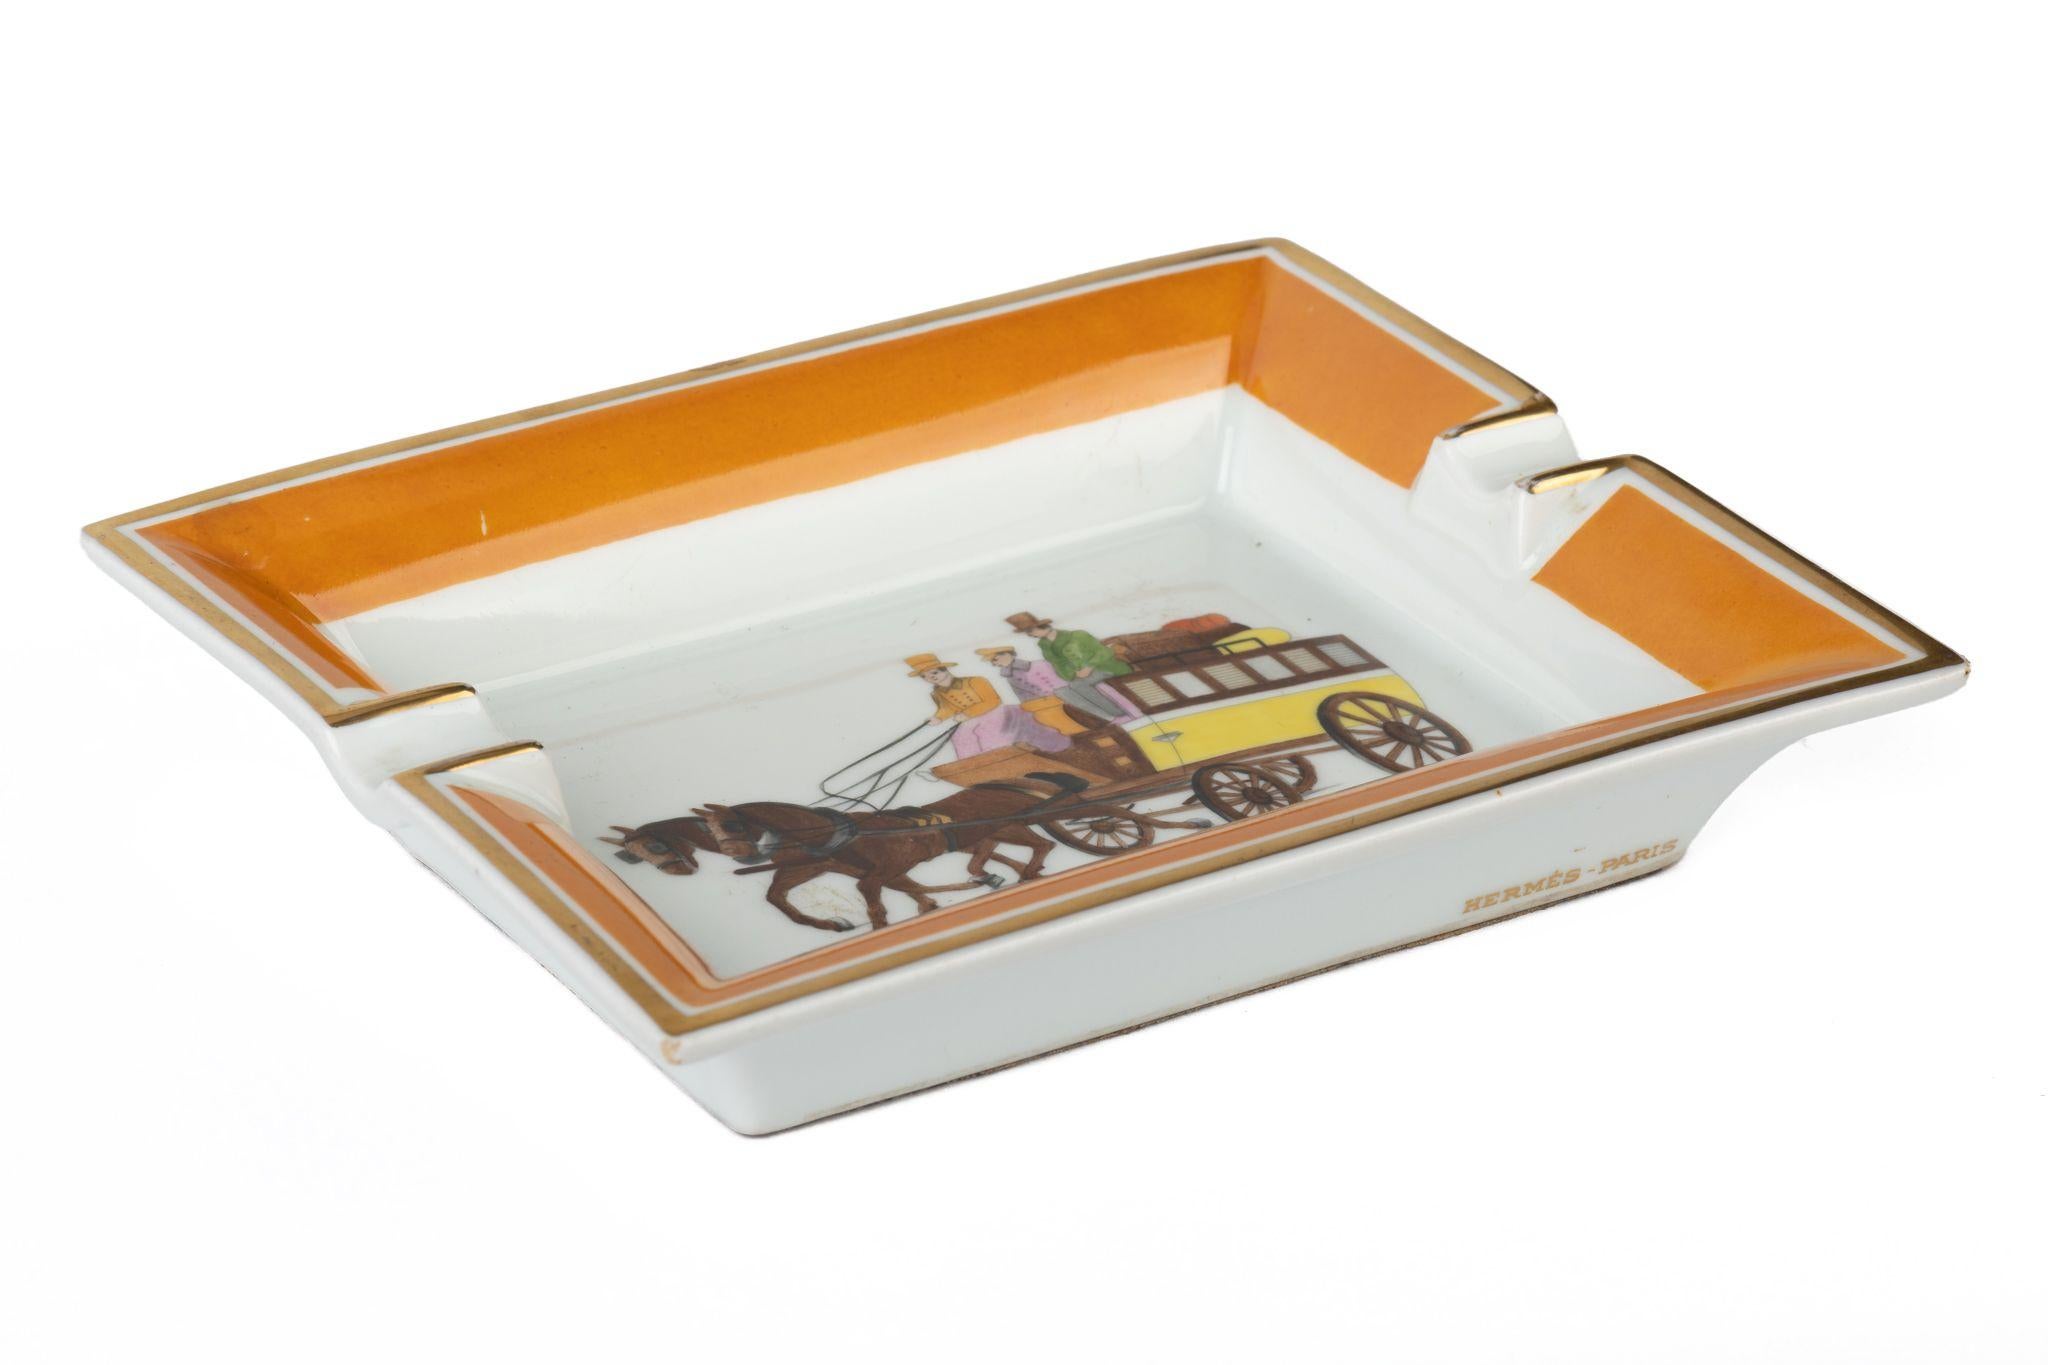 Hermès signature ashtray in white porcelain with a horse carriage design in yellow and brown. The edges are colored orange. Suede stamped bottom.
